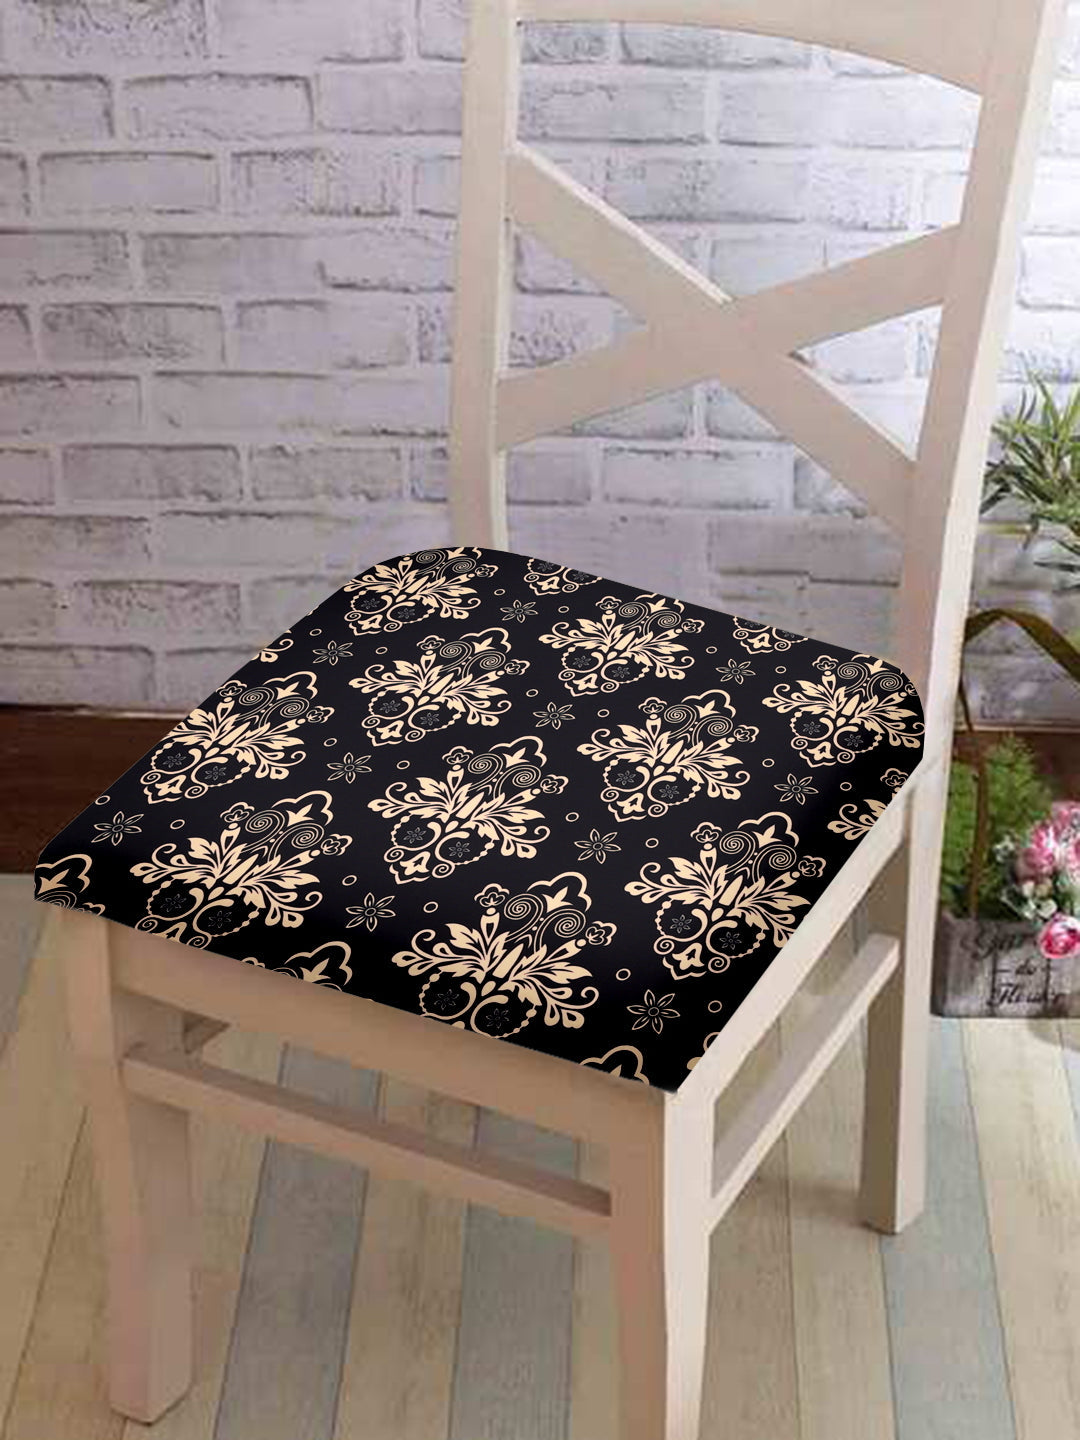 Stretchable Ethnic Printed Non Slip Chair Pad Cover Pack of 1- Black